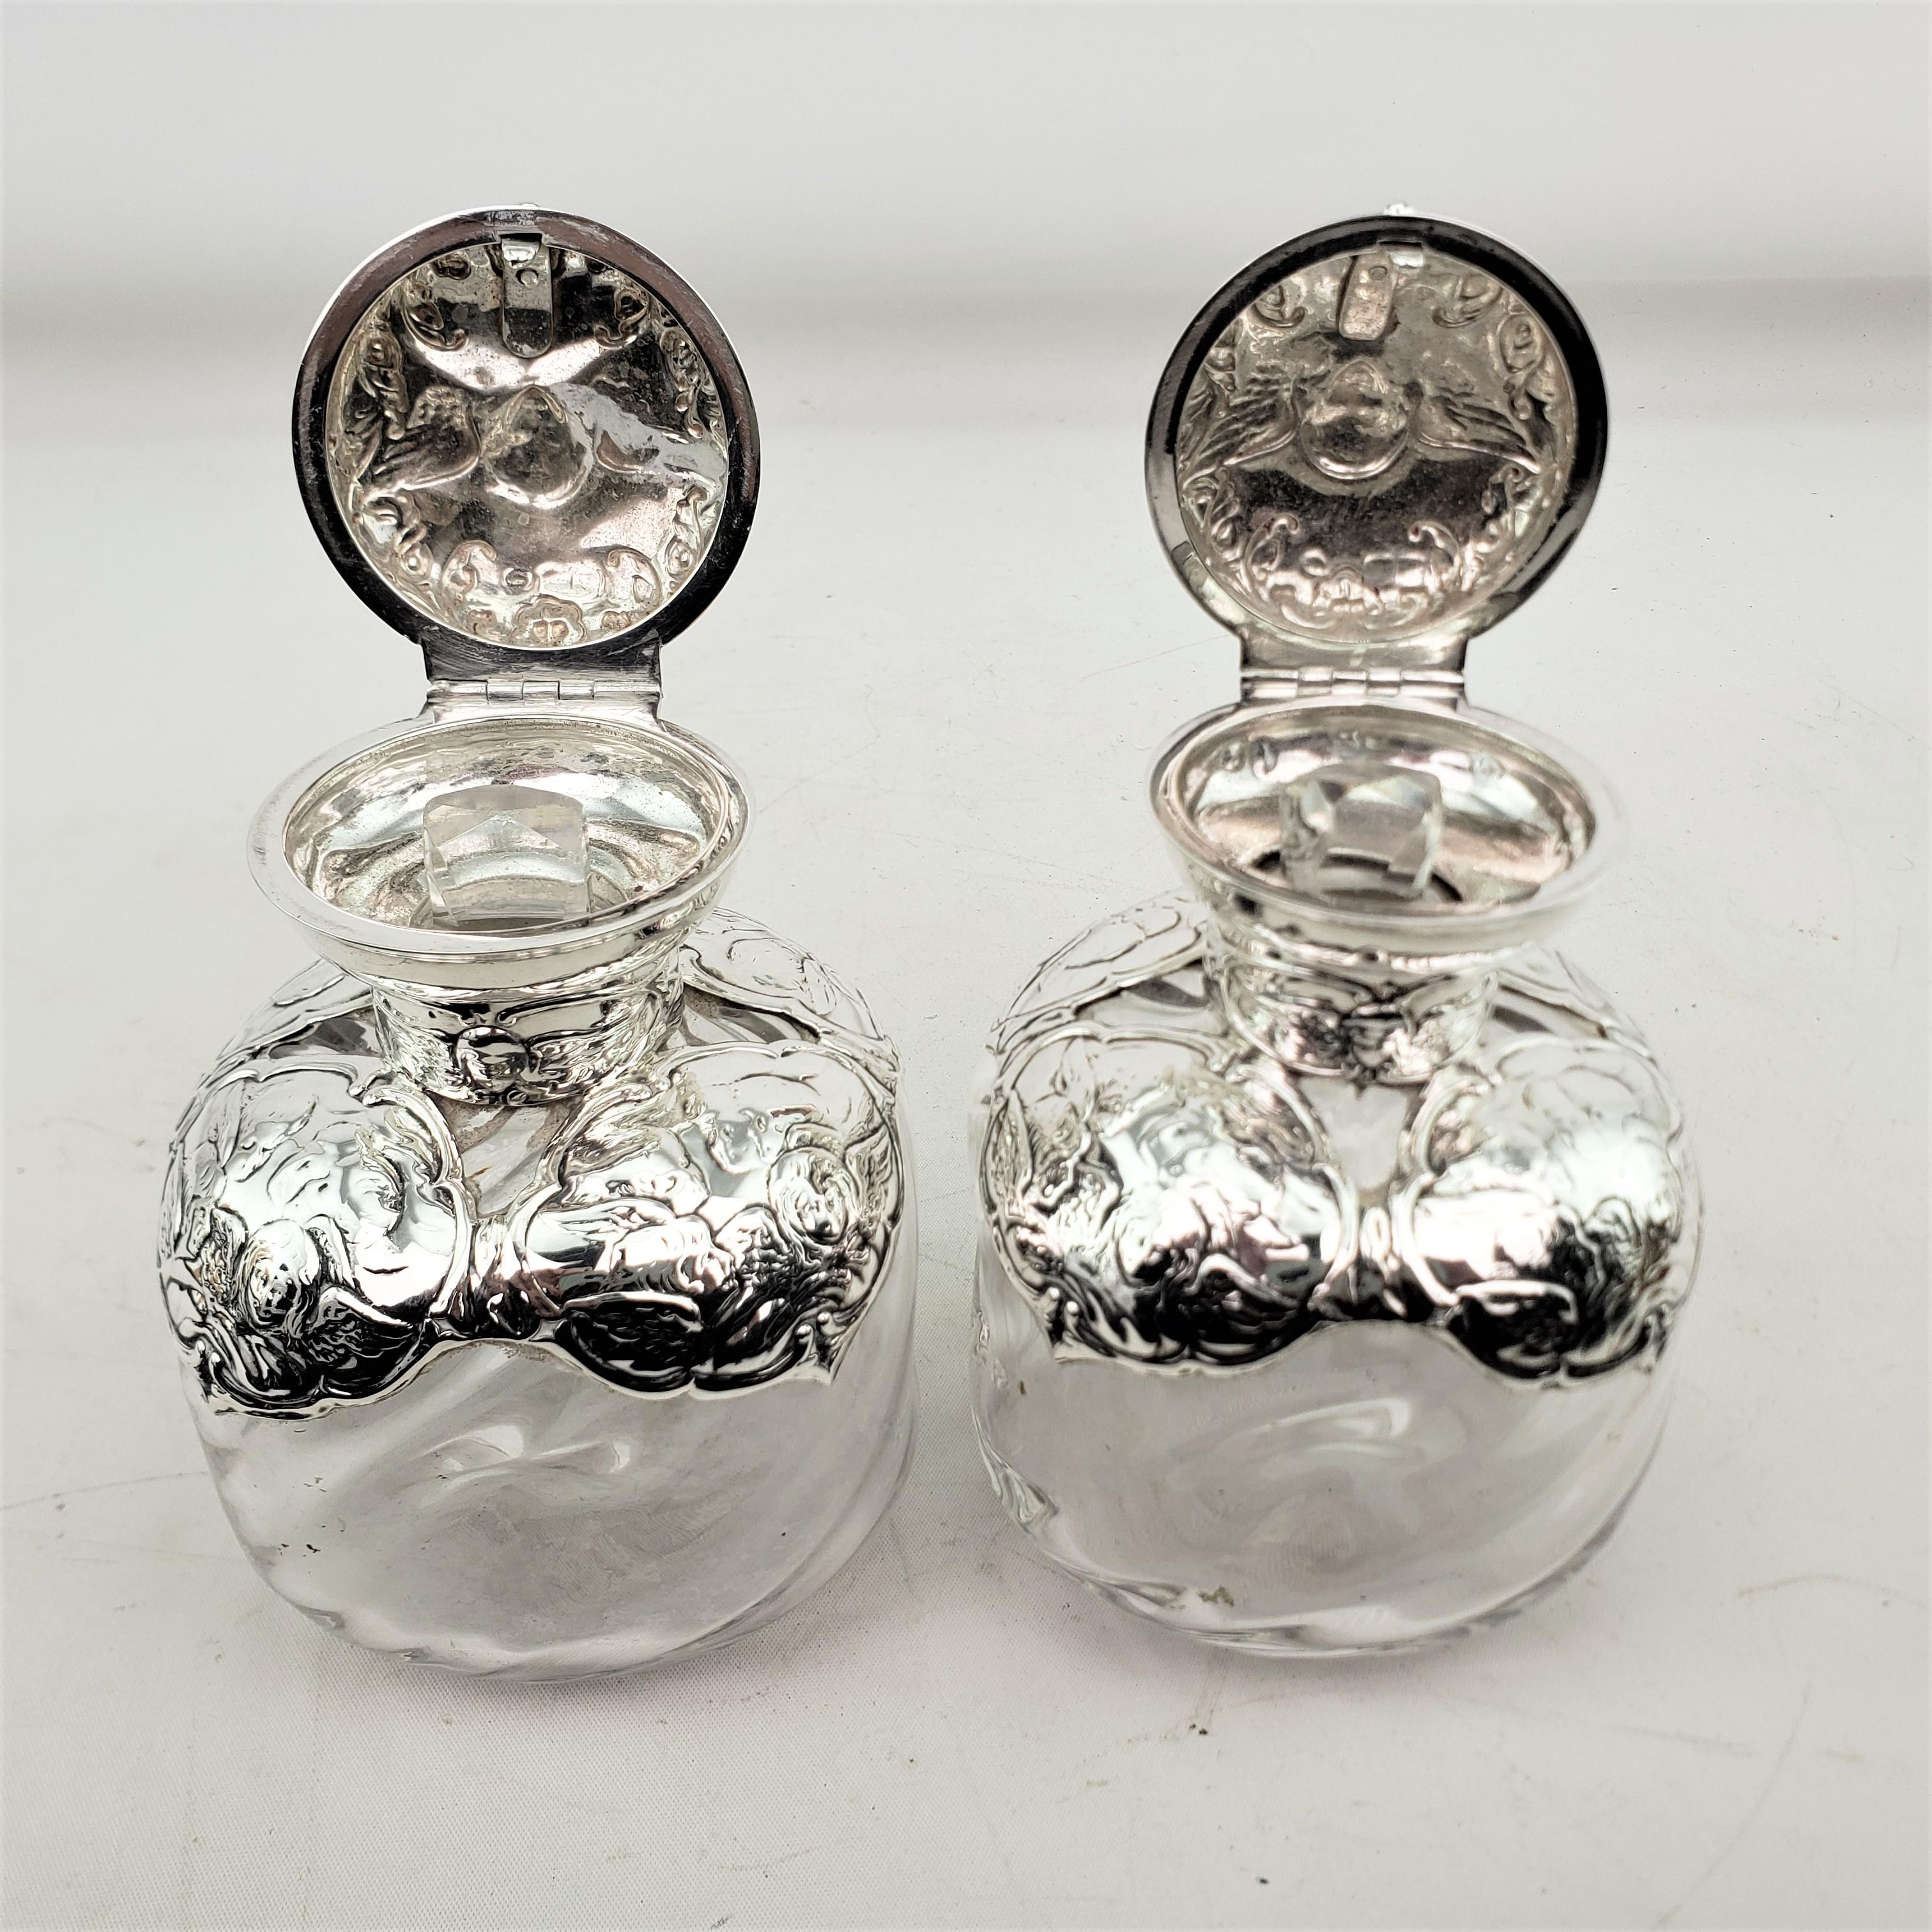 Pair of English Antique Perfume Bottles with Sterling Silver Repousse Angels For Sale 5